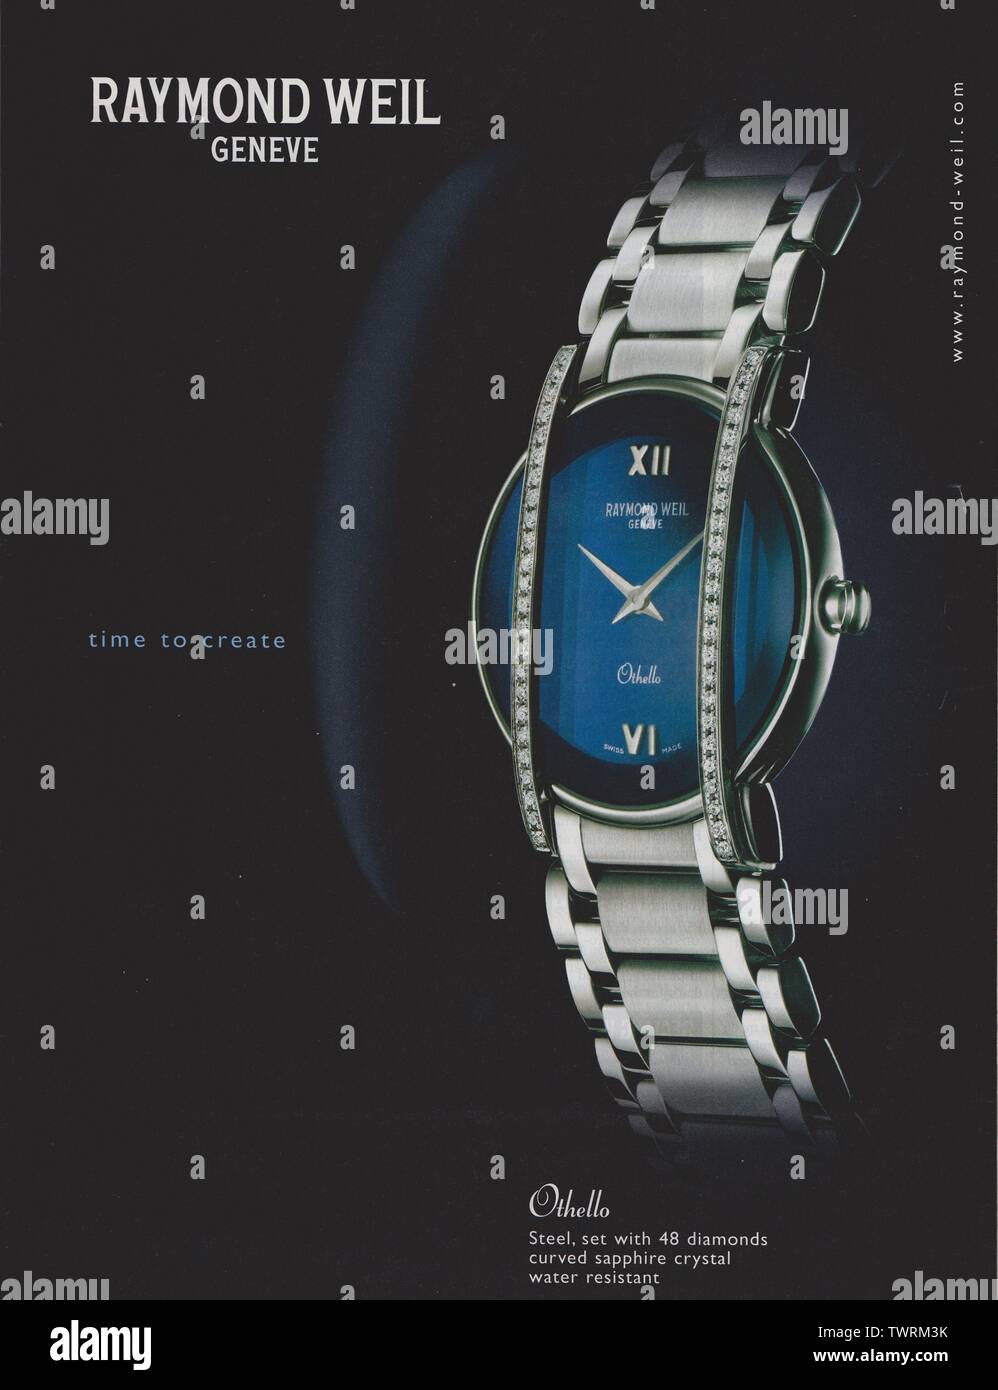 poster advertising Raymond Weil Geneve Othello watch, in paper magazine from 2002, time to create slogan, creative Raymond Weil  advert from 2000s Stock Photo